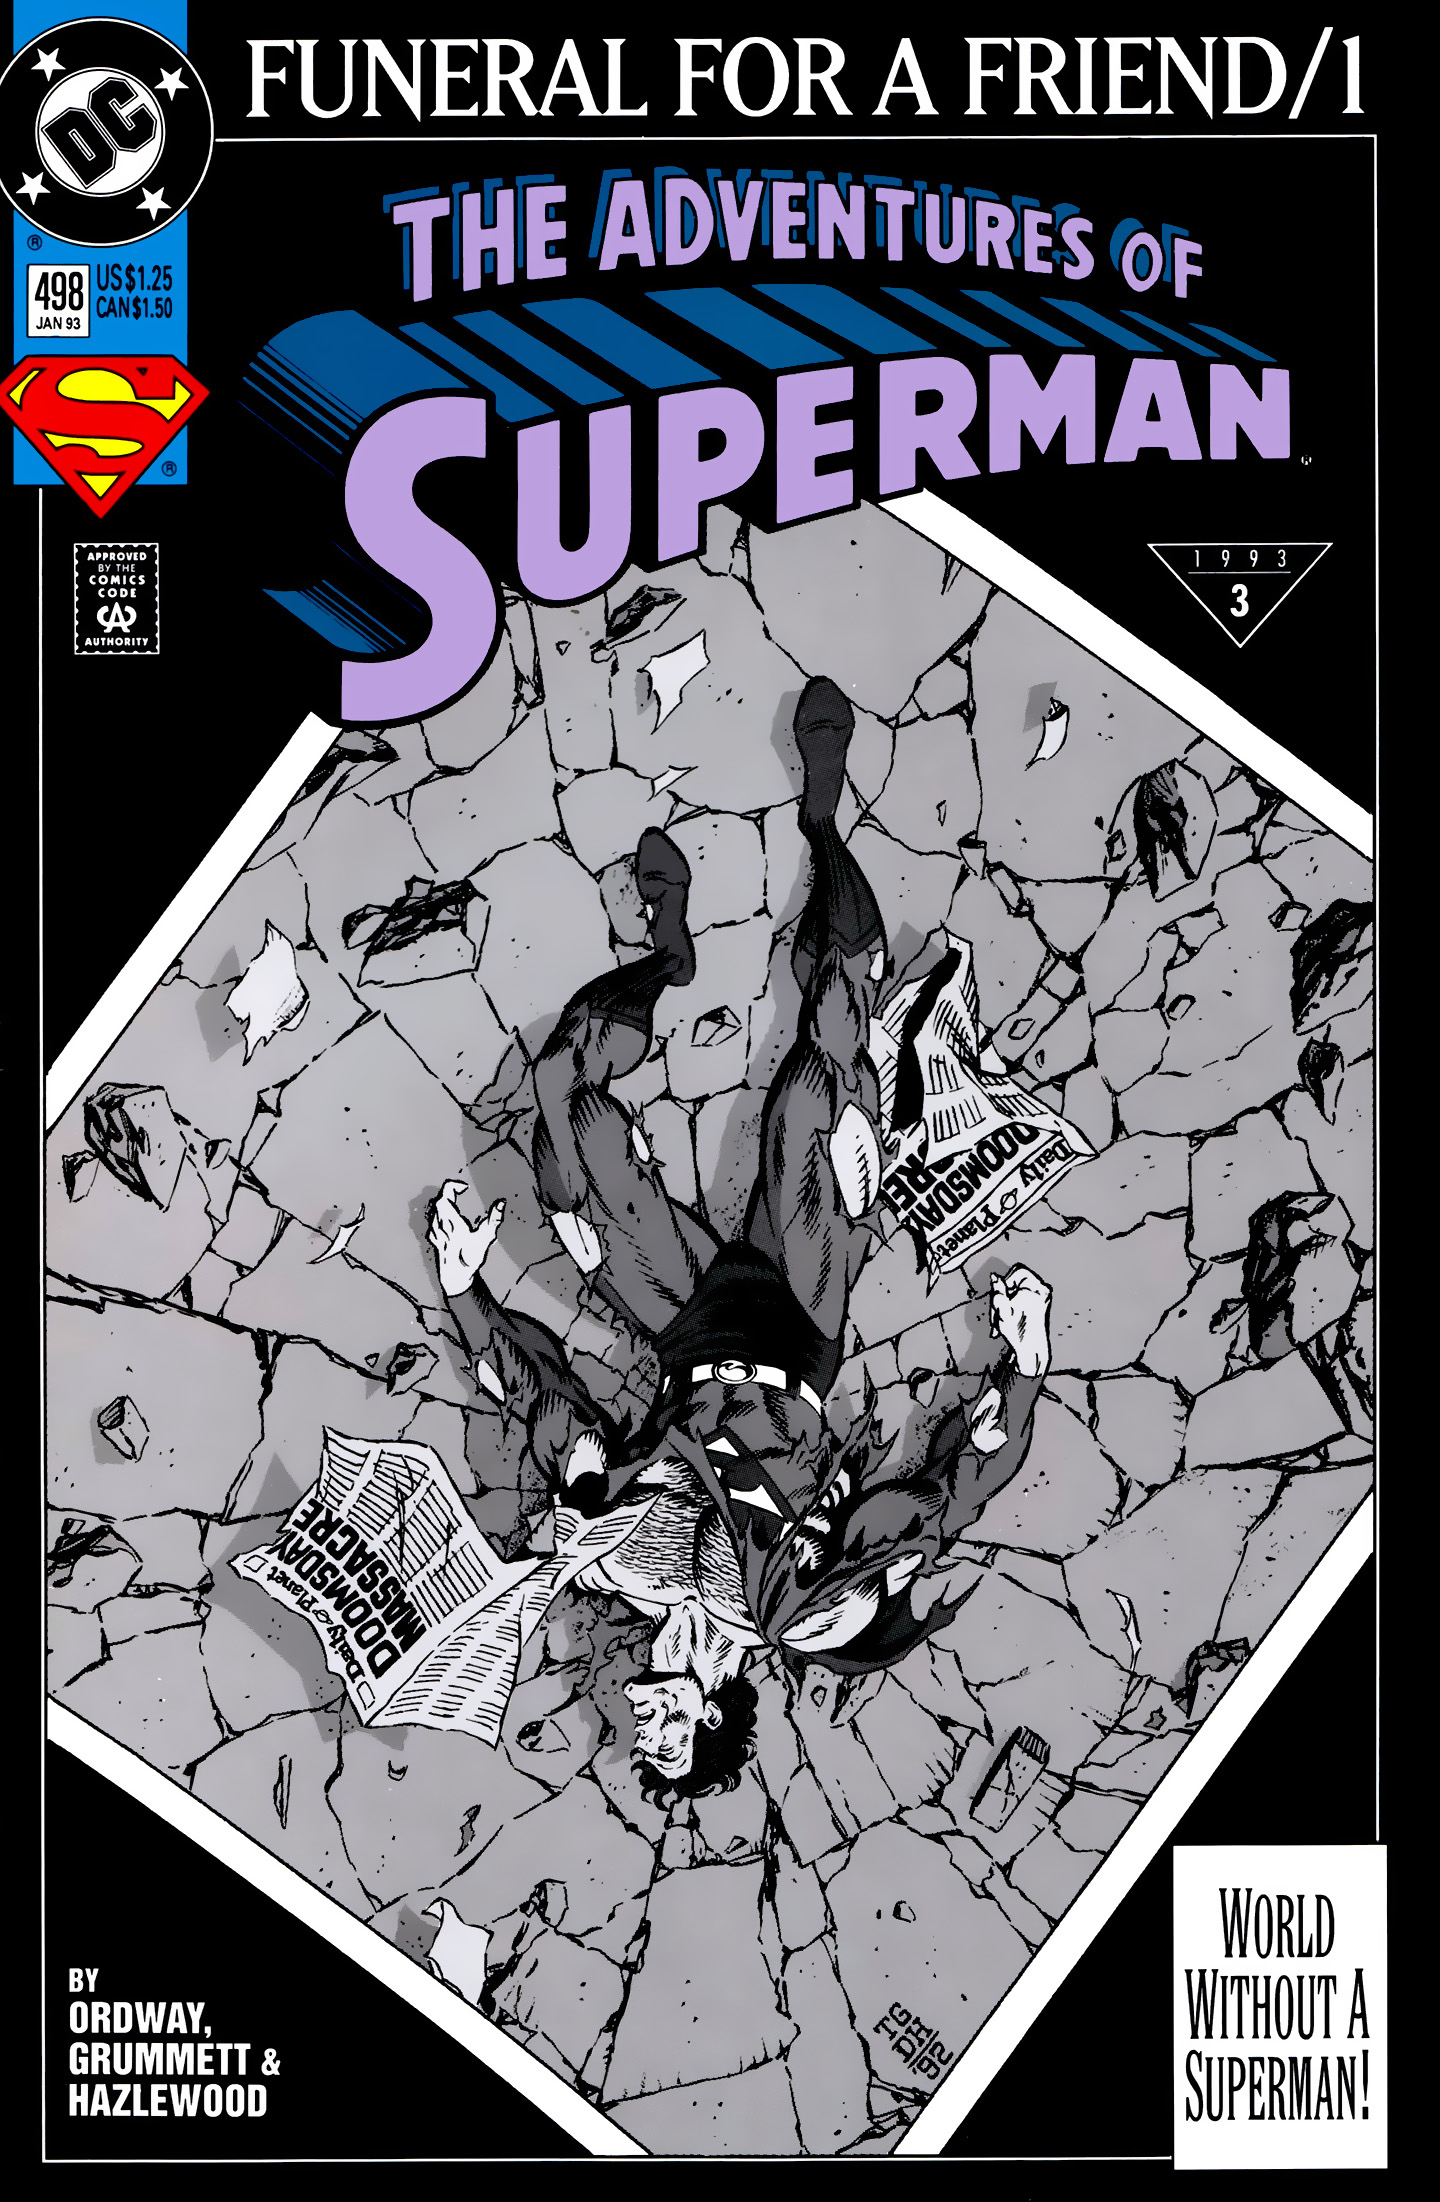 download superman the death and return of superman omnibus